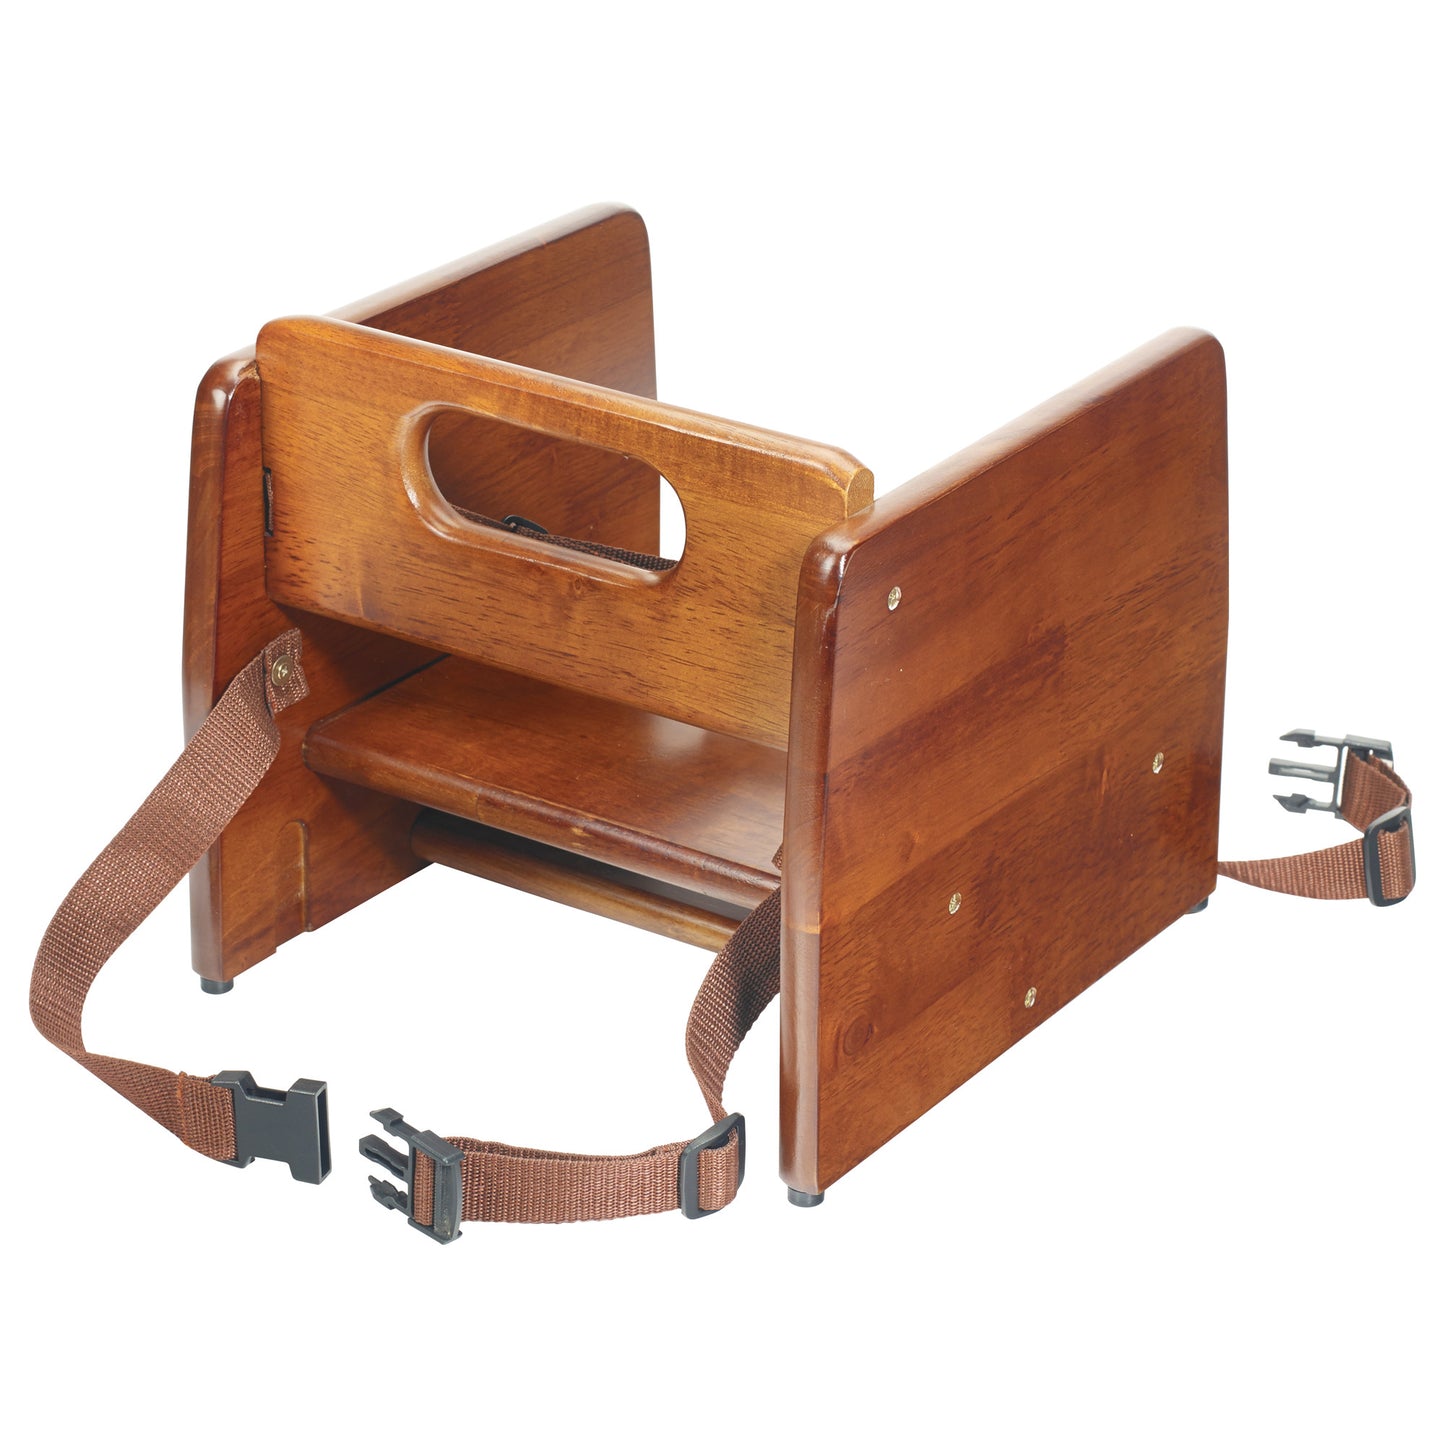 CHB-704 - Stacking Wooden Booster Seat - Walnut